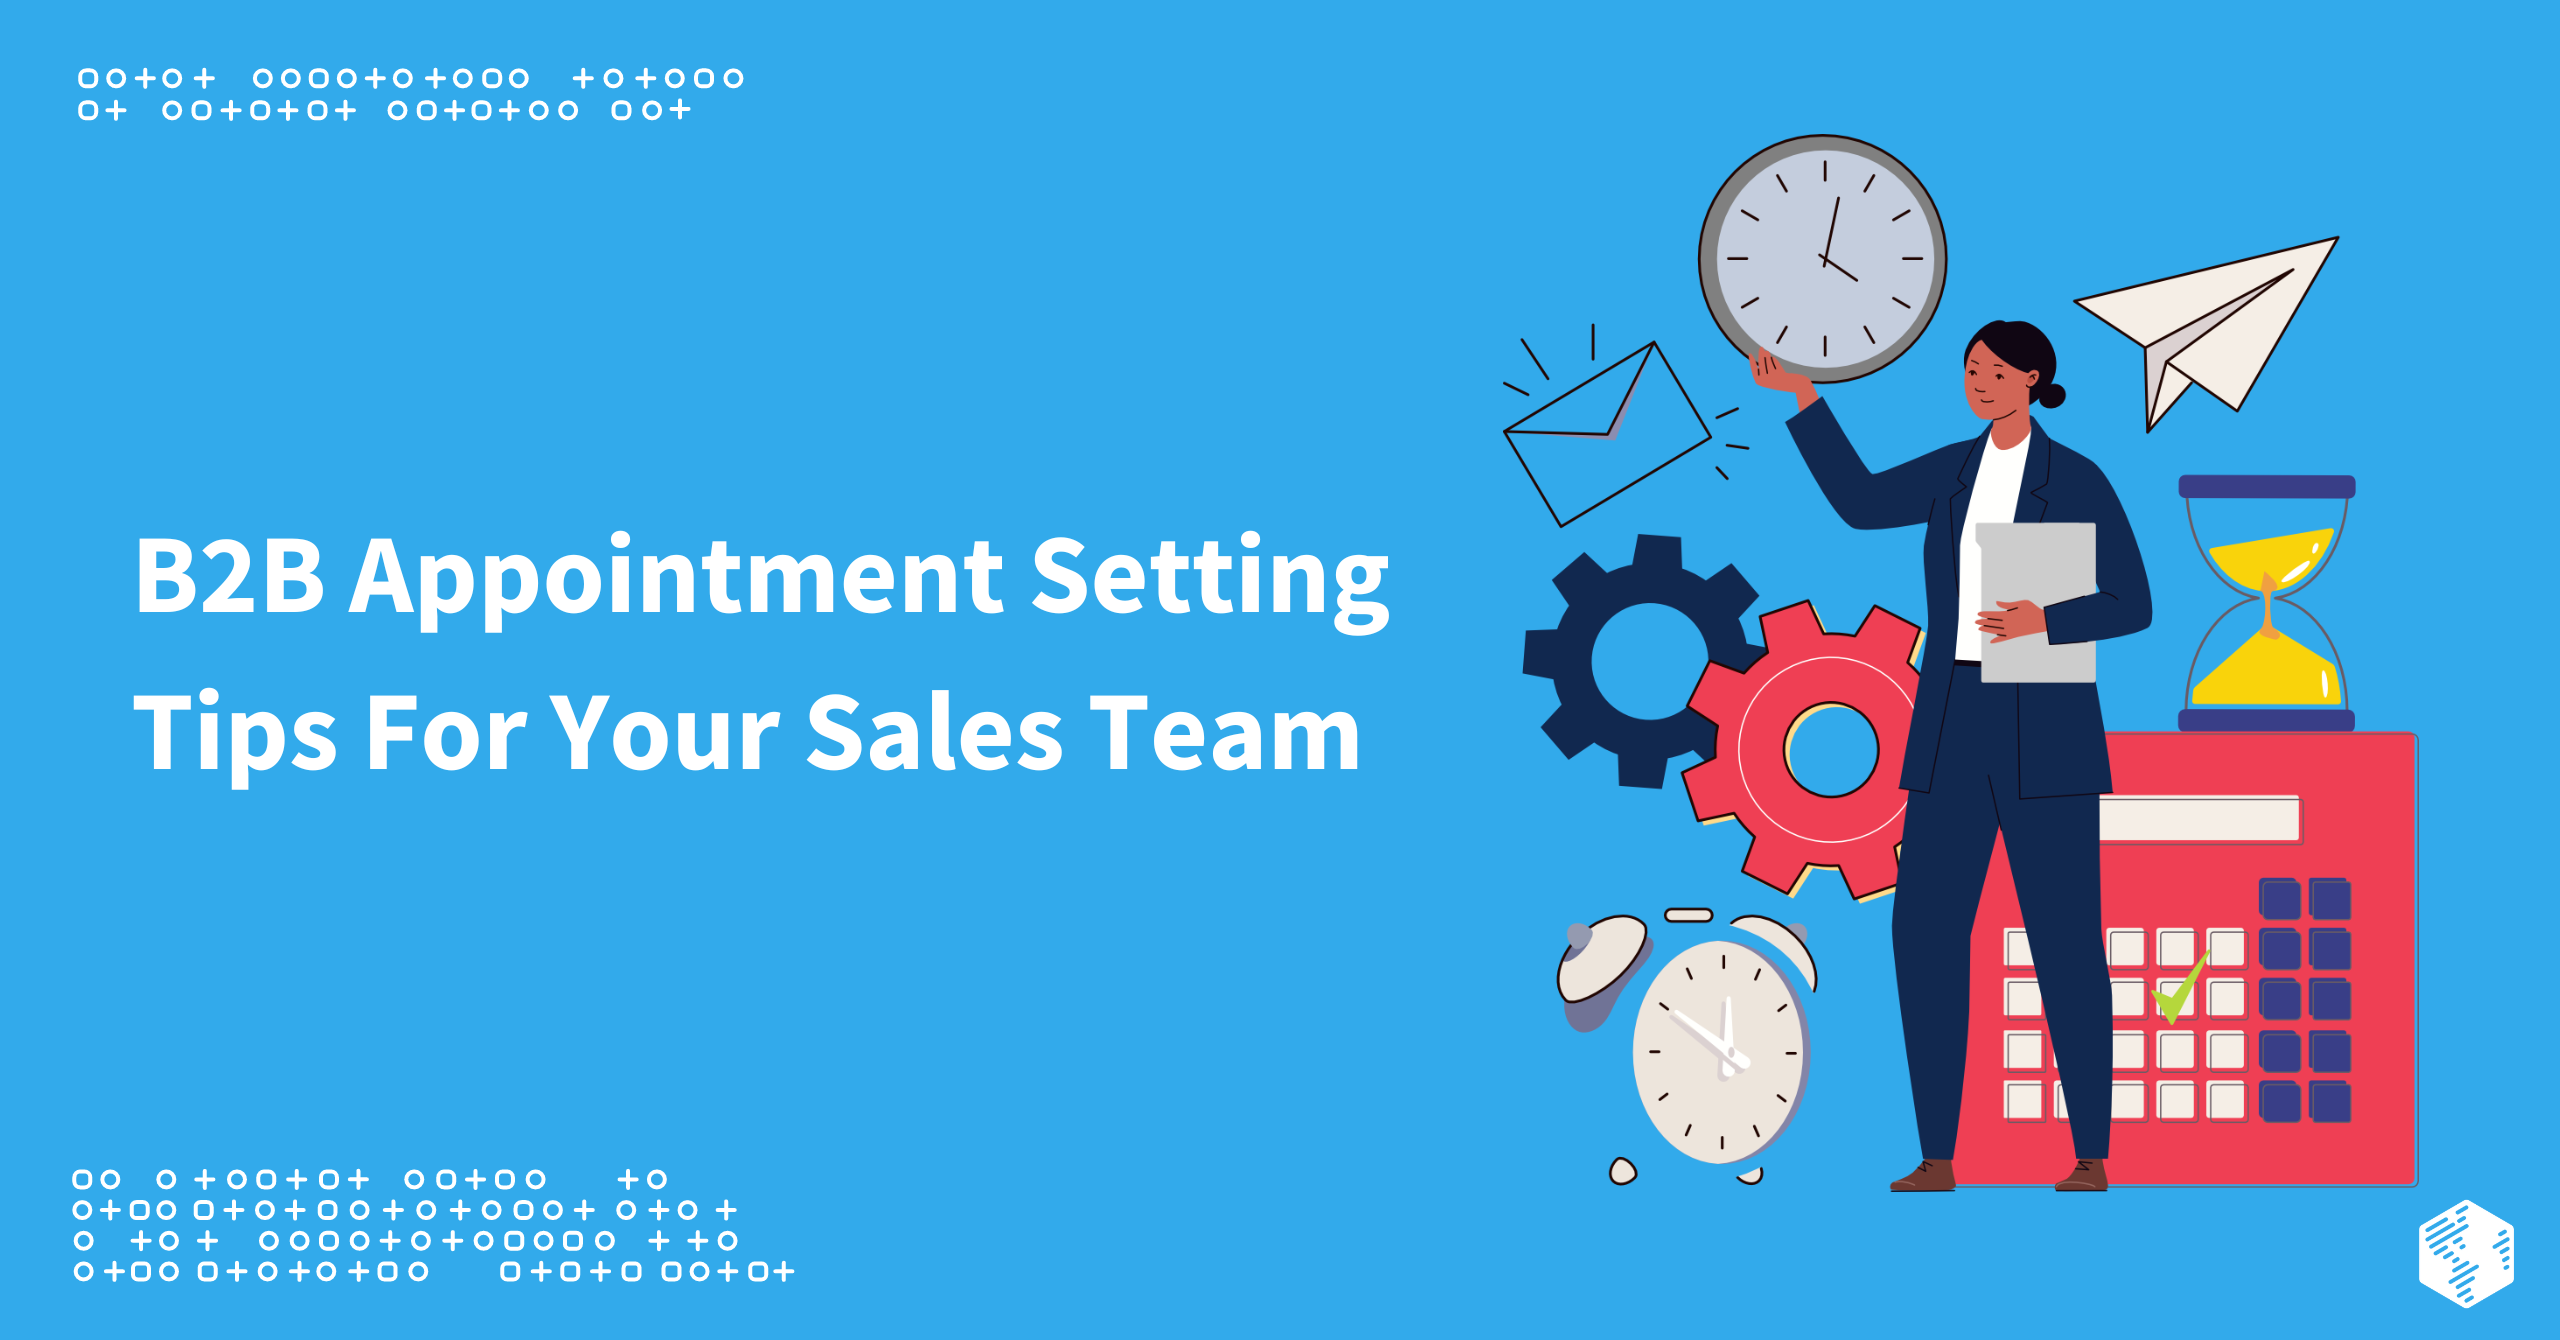 B2B Appointment Setting Tips for Your Sales Team